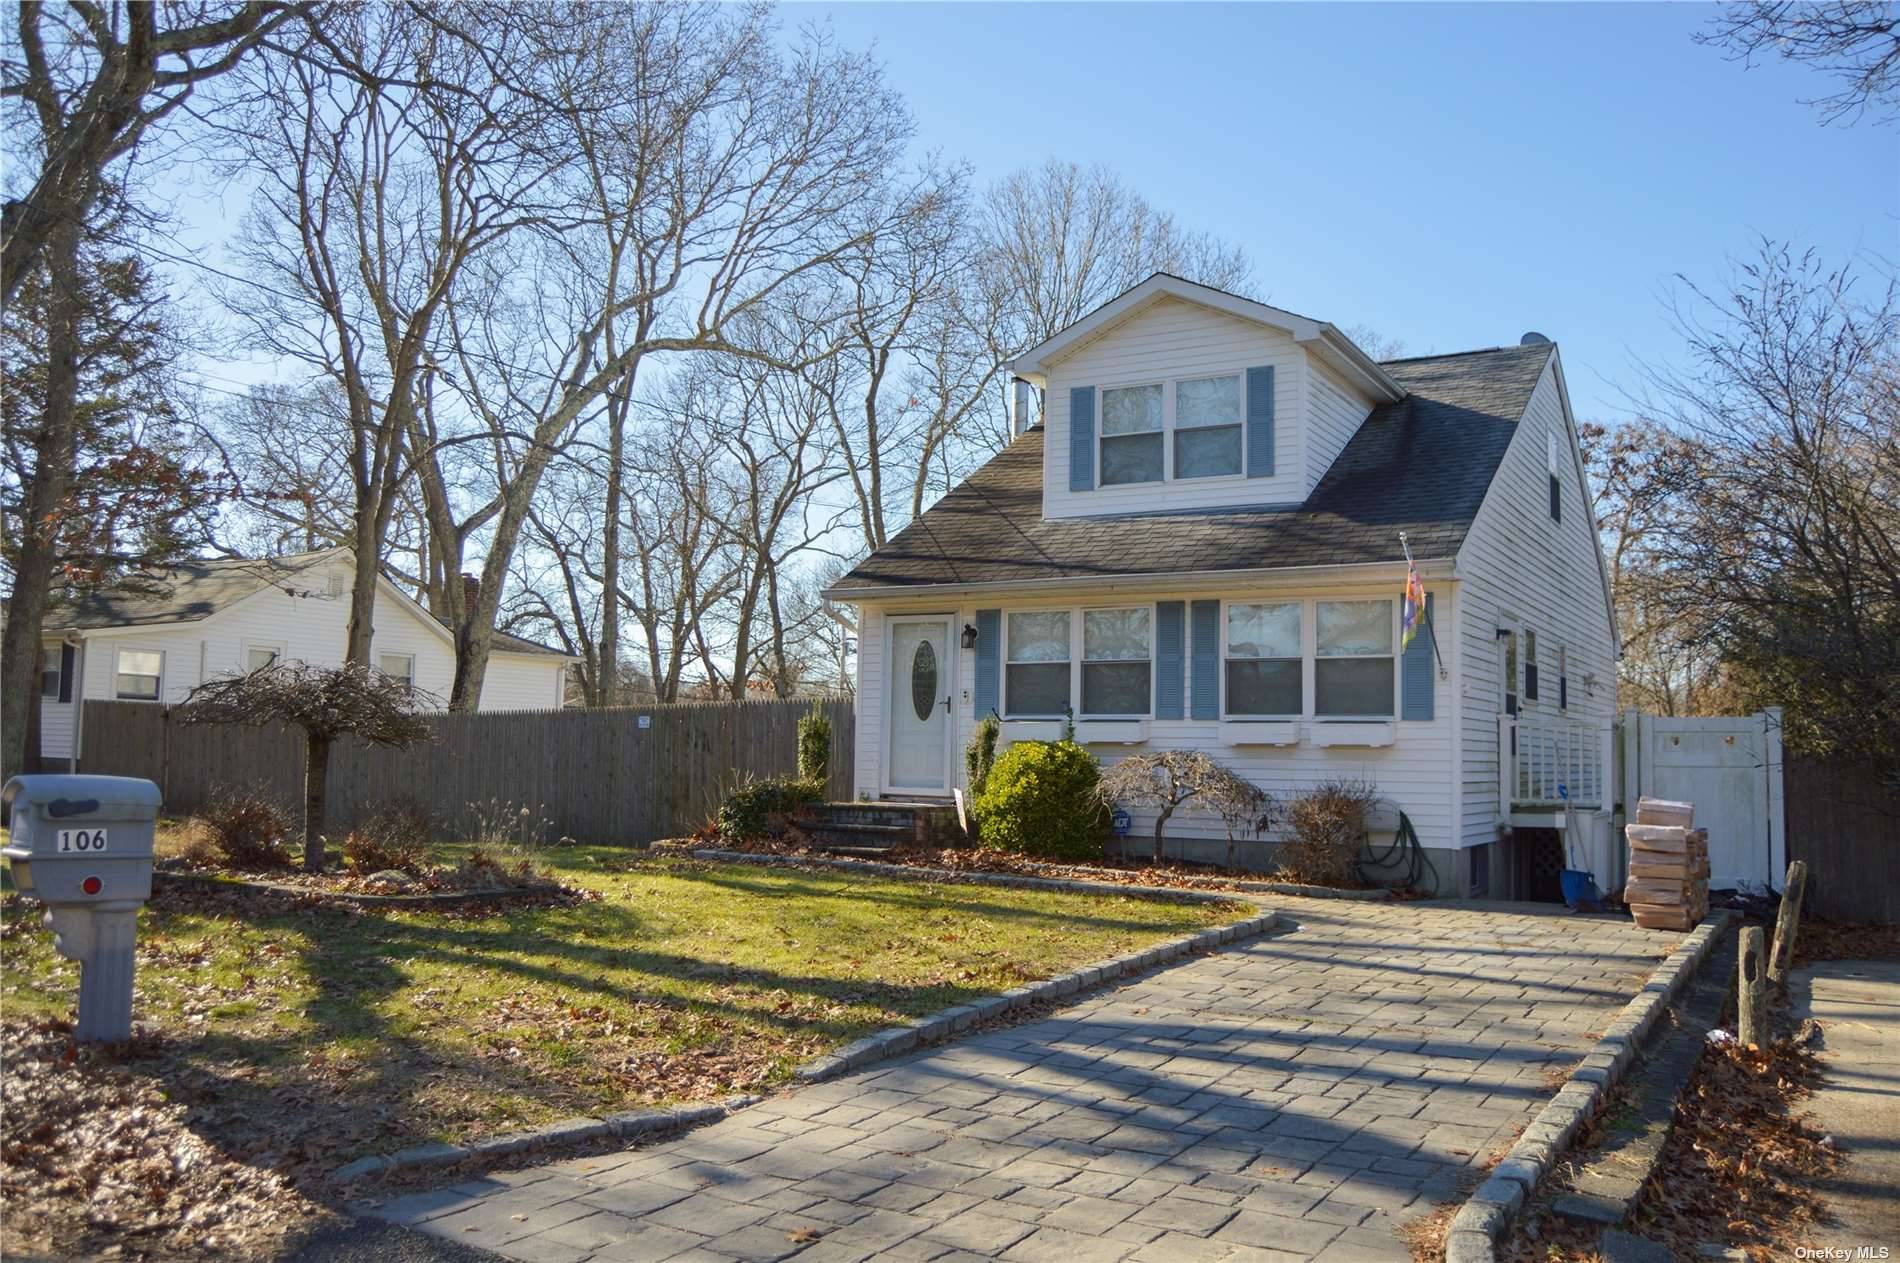 Welcome to this charming 3 bedroom, 2 full bath Cape style home nestled in the heart of Selden, New York.